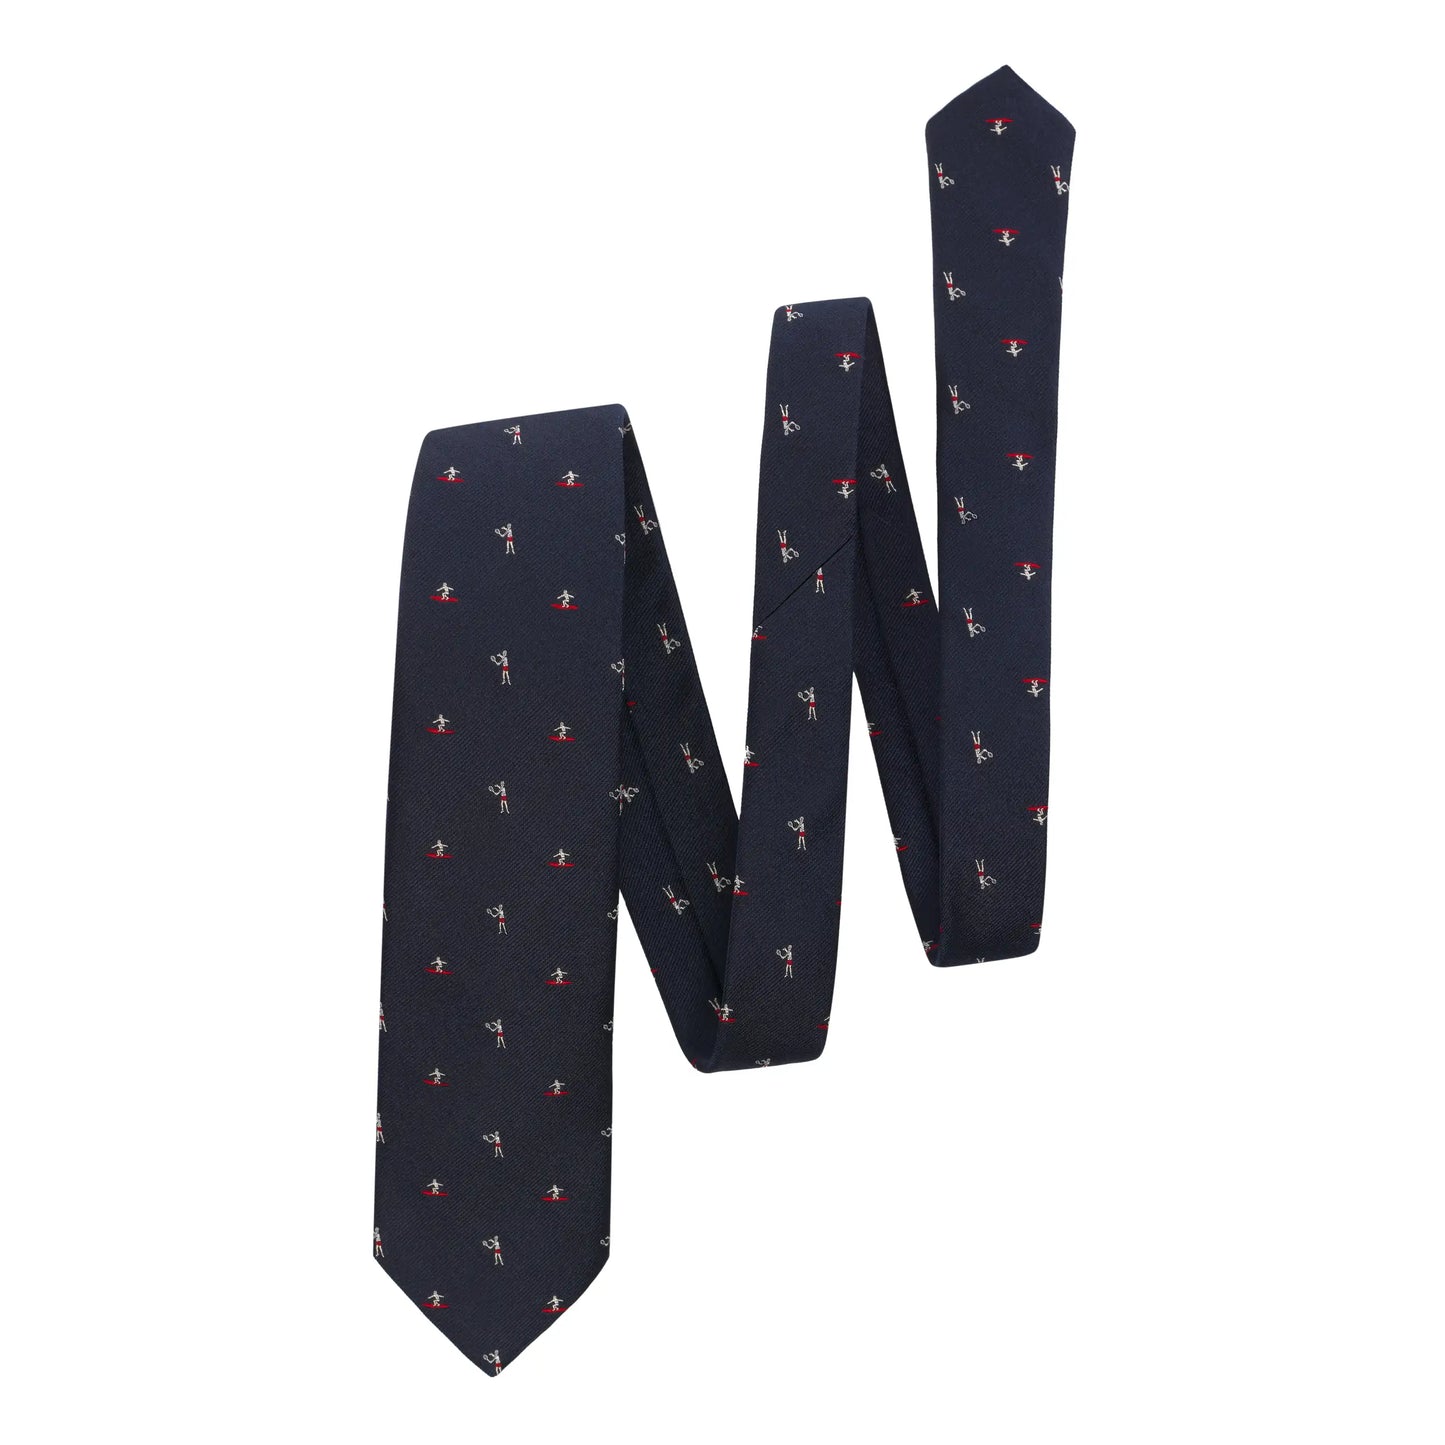 Woven Silk Tie with Sports Design